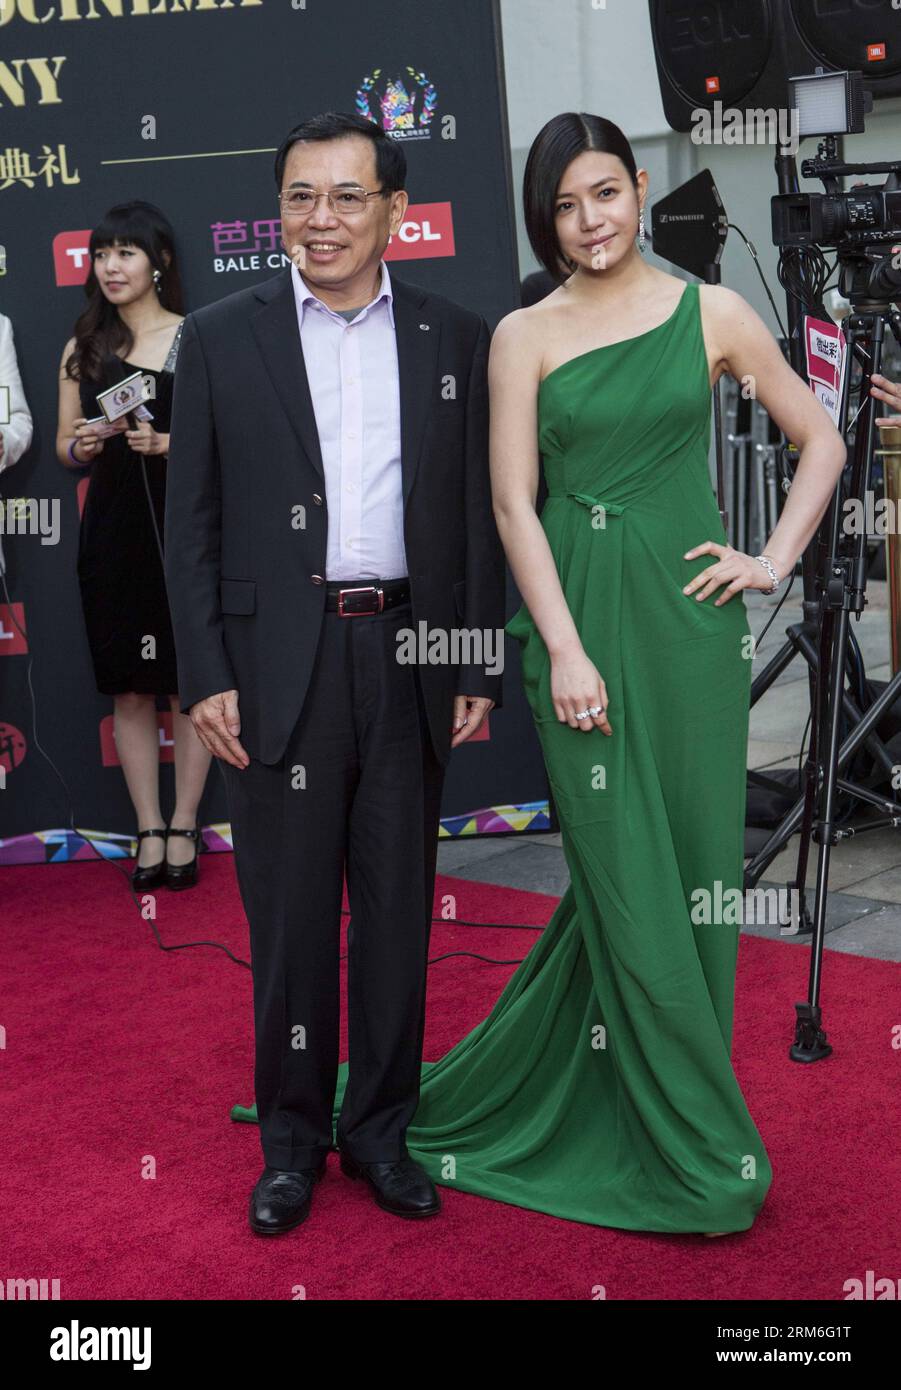 (140111) -- LOS ANGELES, Jan. 10, 2014 (Xinhua) -- Li Dongsheng (L), TCL chairman and CEO, and actress Michelle Chen arrive for the Hollywood TCL Microcinema Award Ceremony at TCL Chinese Theater in Los Angeles, the United States, Jan. 10, 2014. (Xinhua/Zhao Hanrong) U.S.-LOS ANGELES-MICROCINEMA AWARD PUBLICATIONxNOTxINxCHN   Los Angeles Jan 10 2014 XINHUA left Dongsheng l TCL Chairman and CEO and actress Michelle Chen Arrive for The Hollywood TCL  Award Ceremony AT TCL Chinese Theatre in Los Angeles The United States Jan 10 2014 XINHUA Zhao  U S Los Angeles  Award PUBLICATIONxNOTxINxCHN Stock Photo